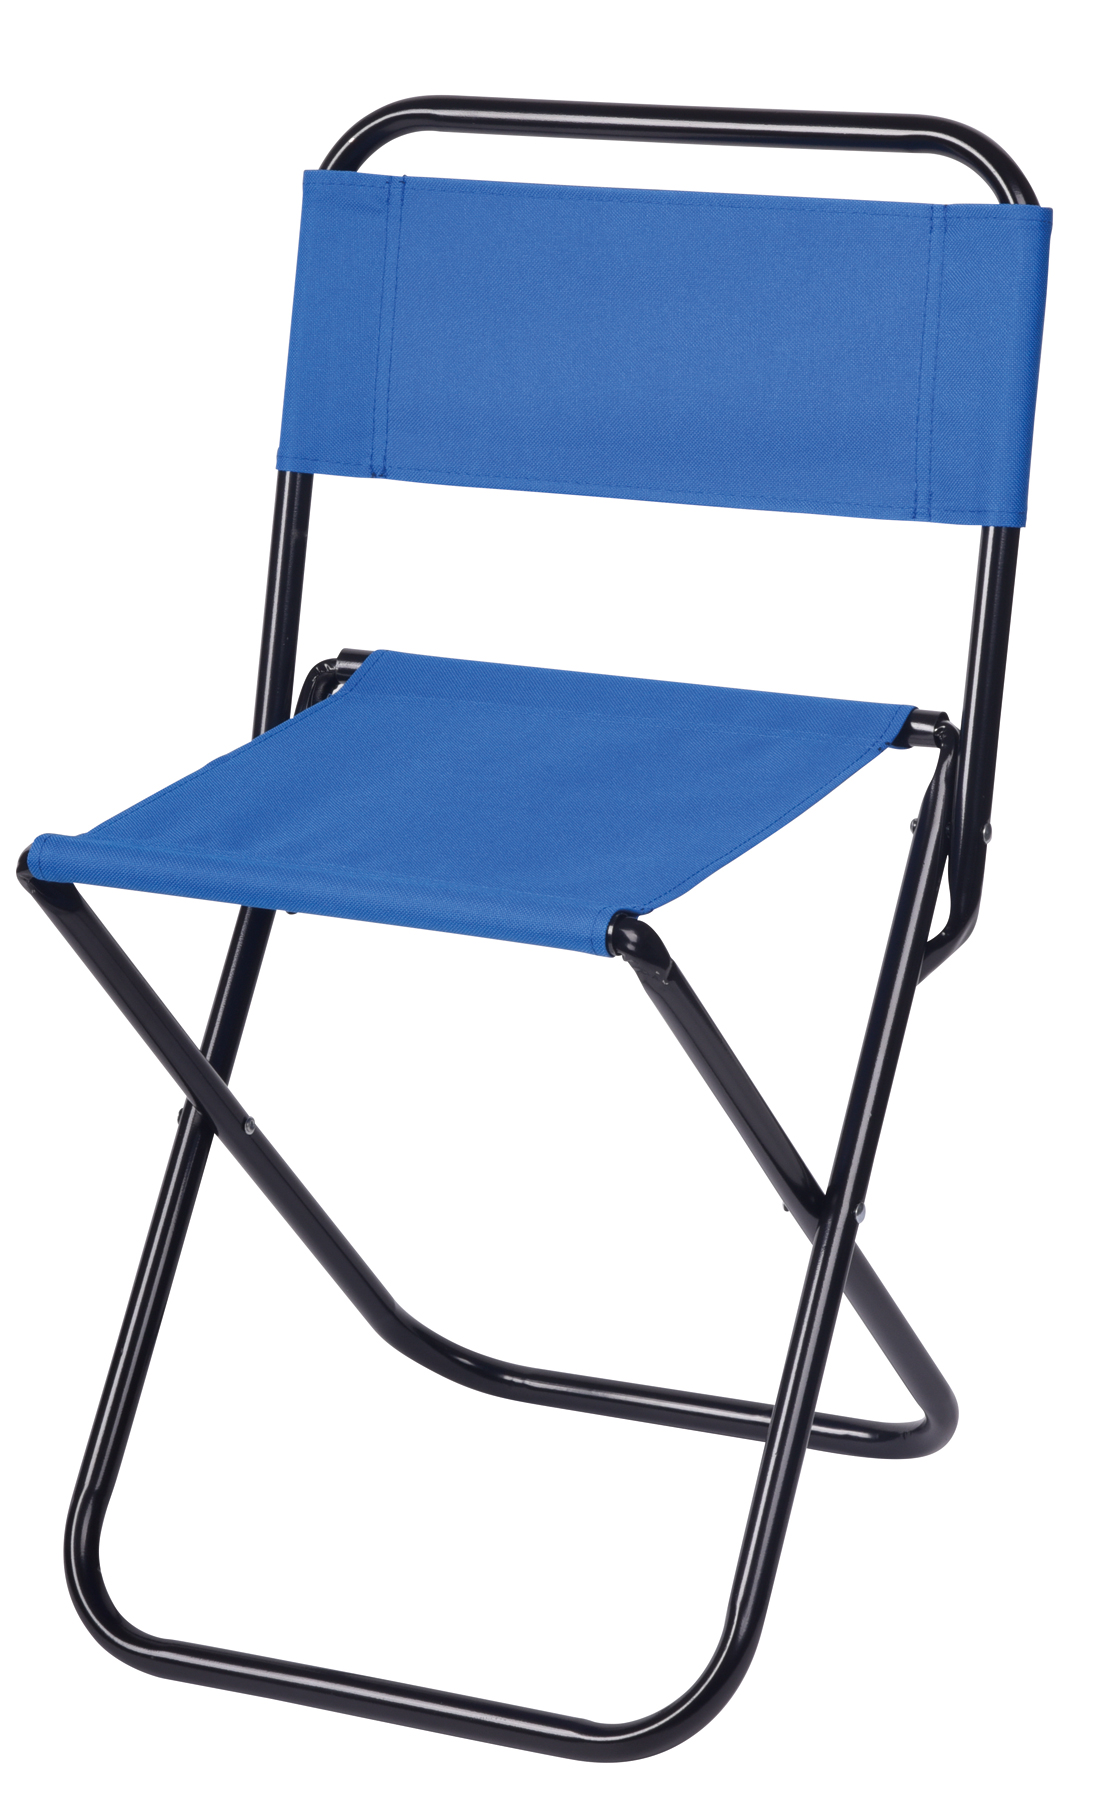 Folding camping chair TAKEOUT - blue